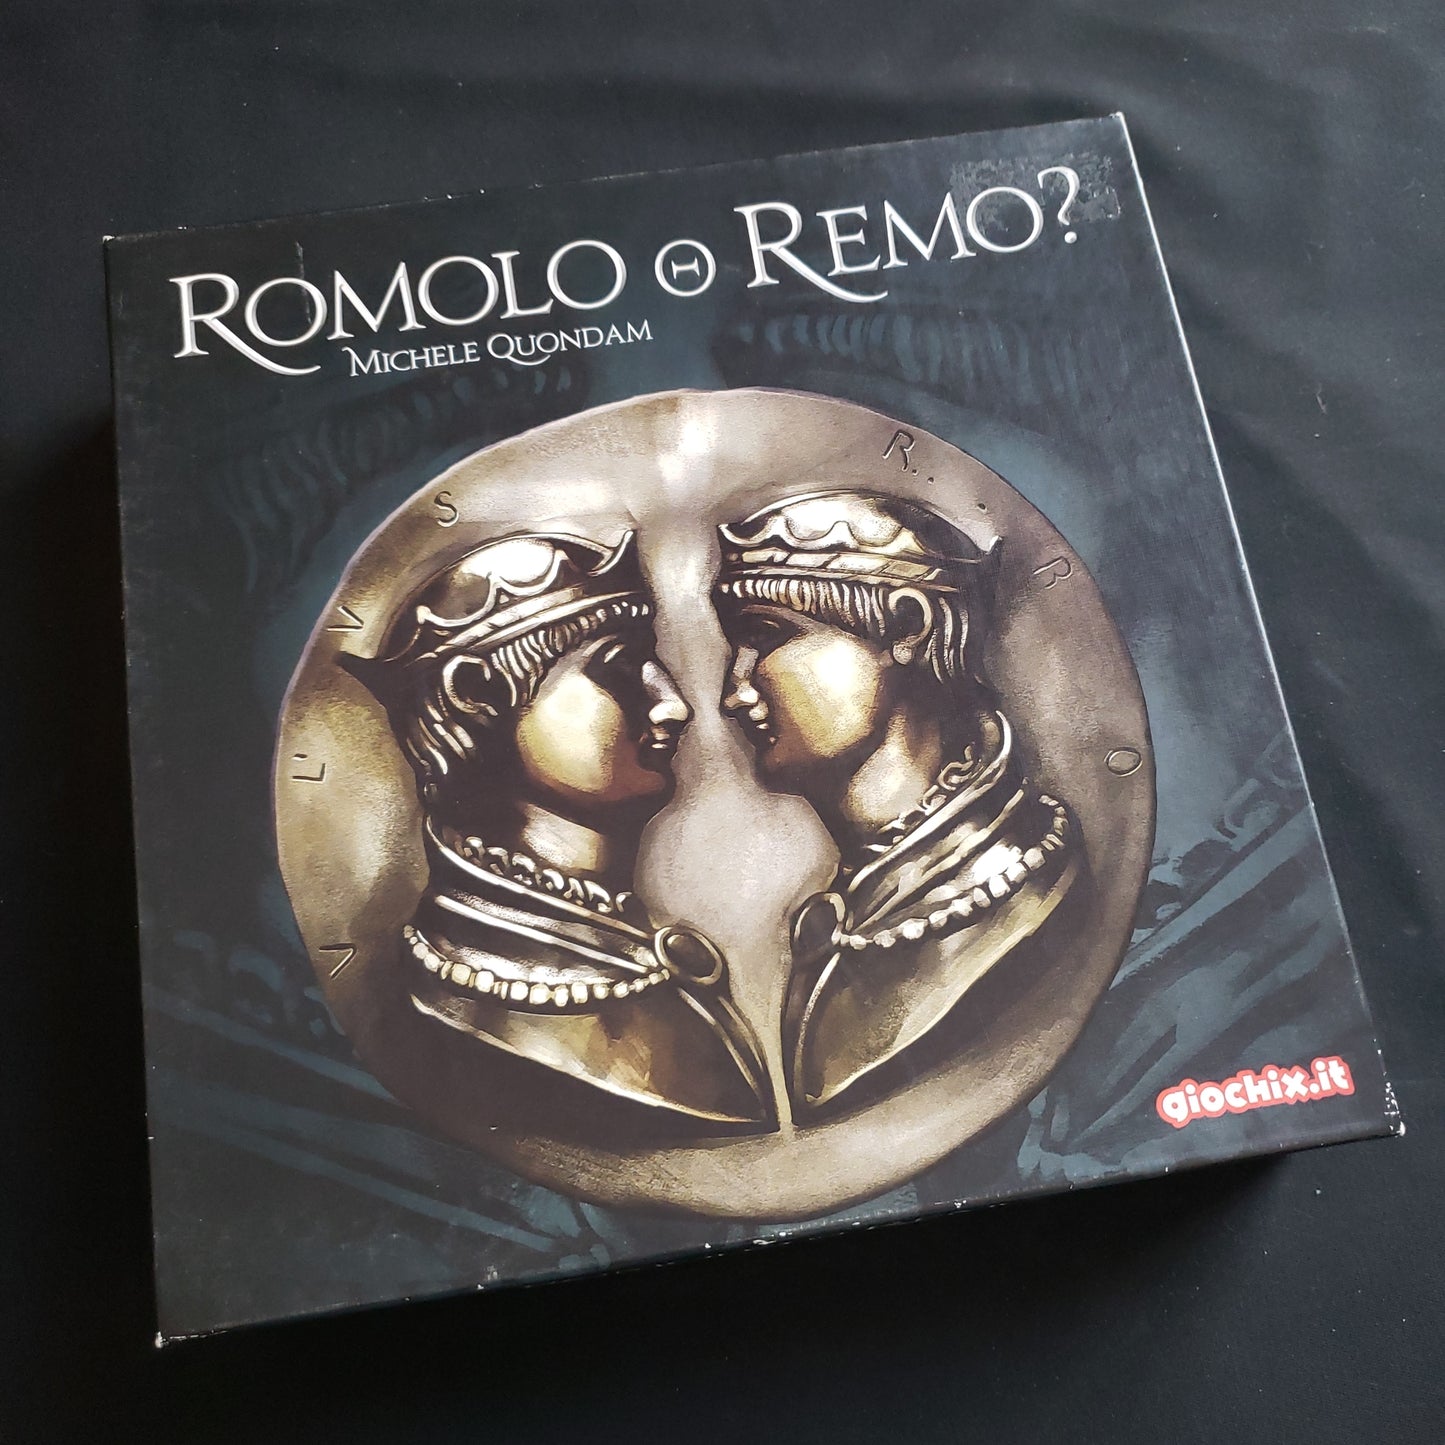 Image shows the front cover of the box of the Romolo o Remo? board game